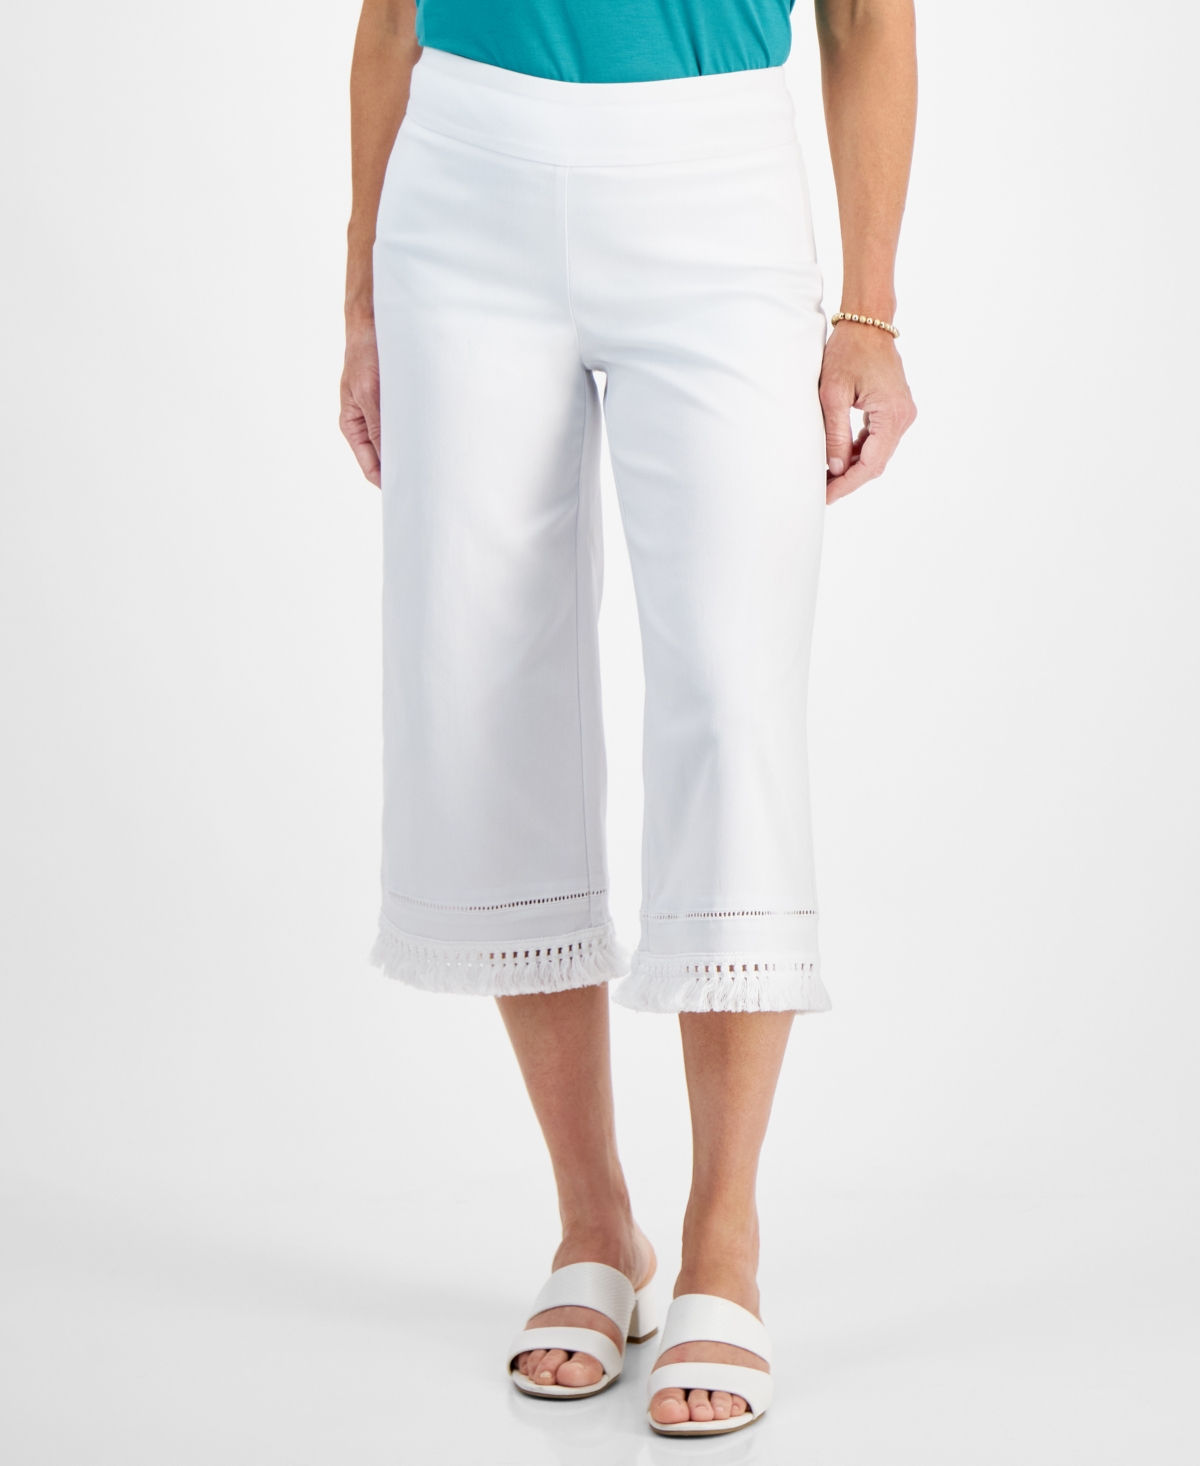 Jm Collection Petite Fringe-trim Capri Pants, Created For Macy's In Bright White